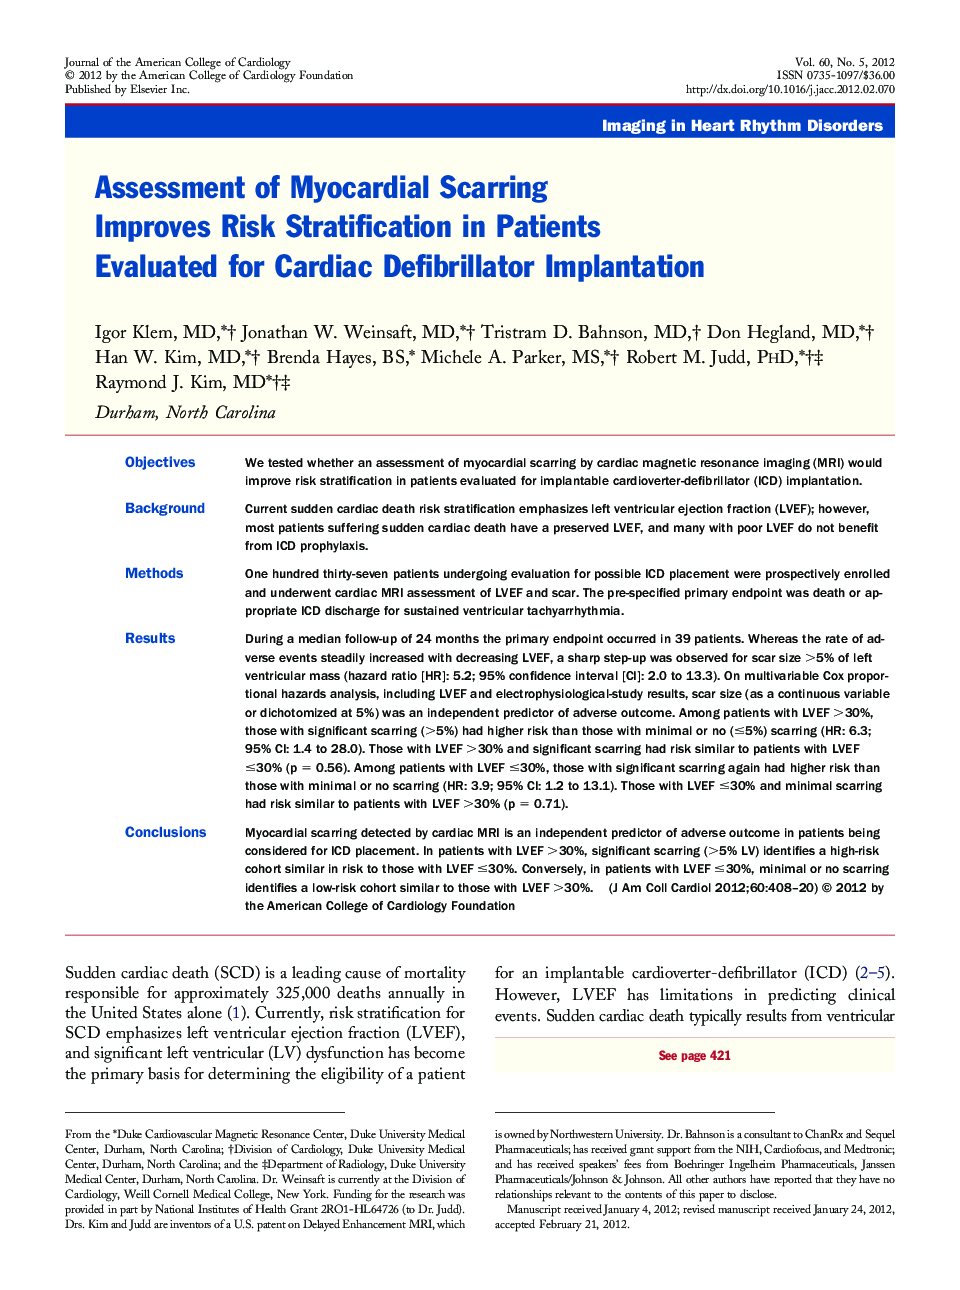 Assessment of Myocardial Scarring Improves Risk Stratification in Patients Evaluated for Cardiac Defibrillator Implantation 